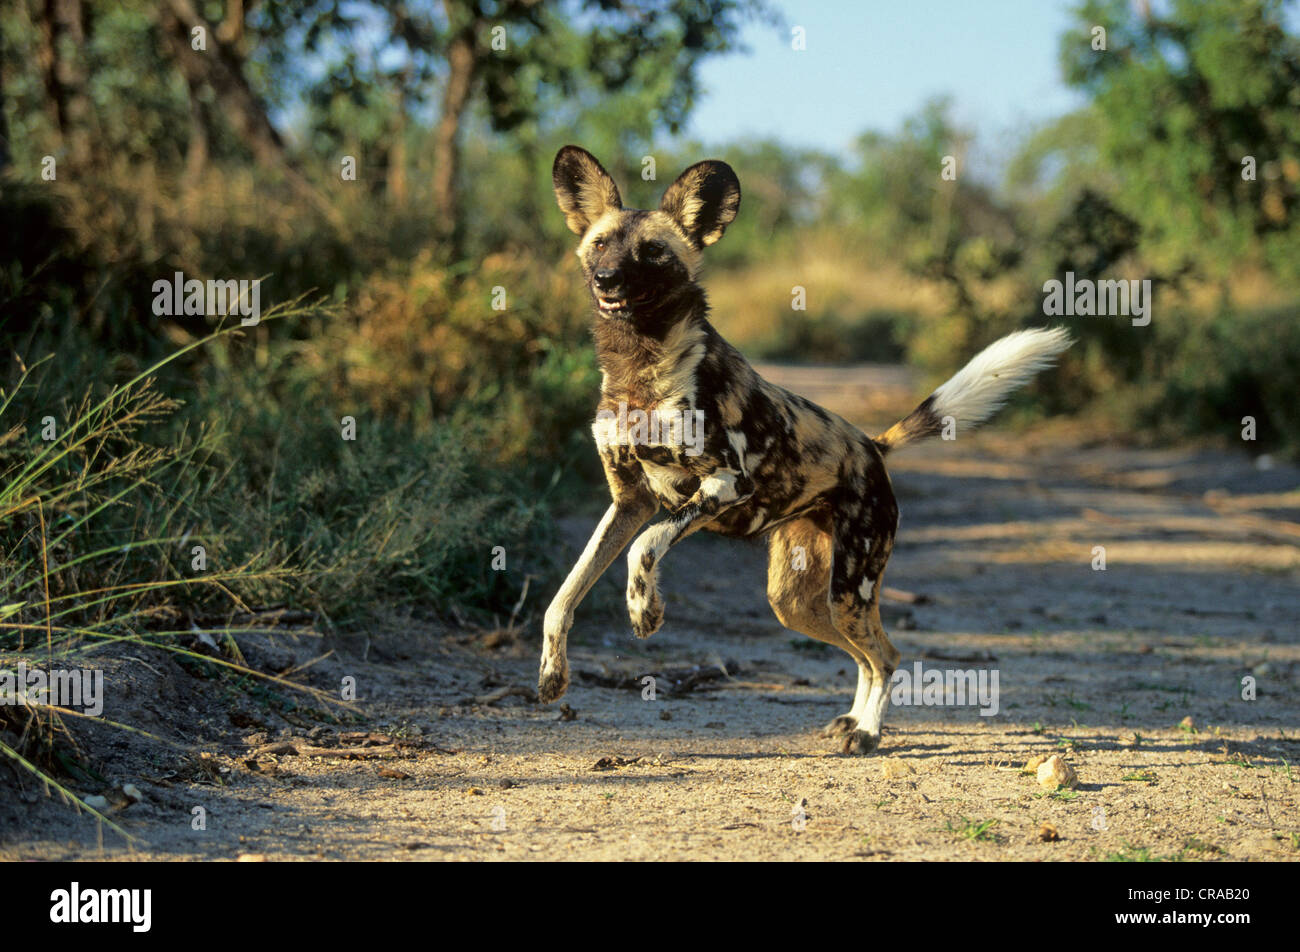 Wild dog (Lycaon pictus), Kapama Game Reserve, Greater Kruger Park, South Africa Stock Photo